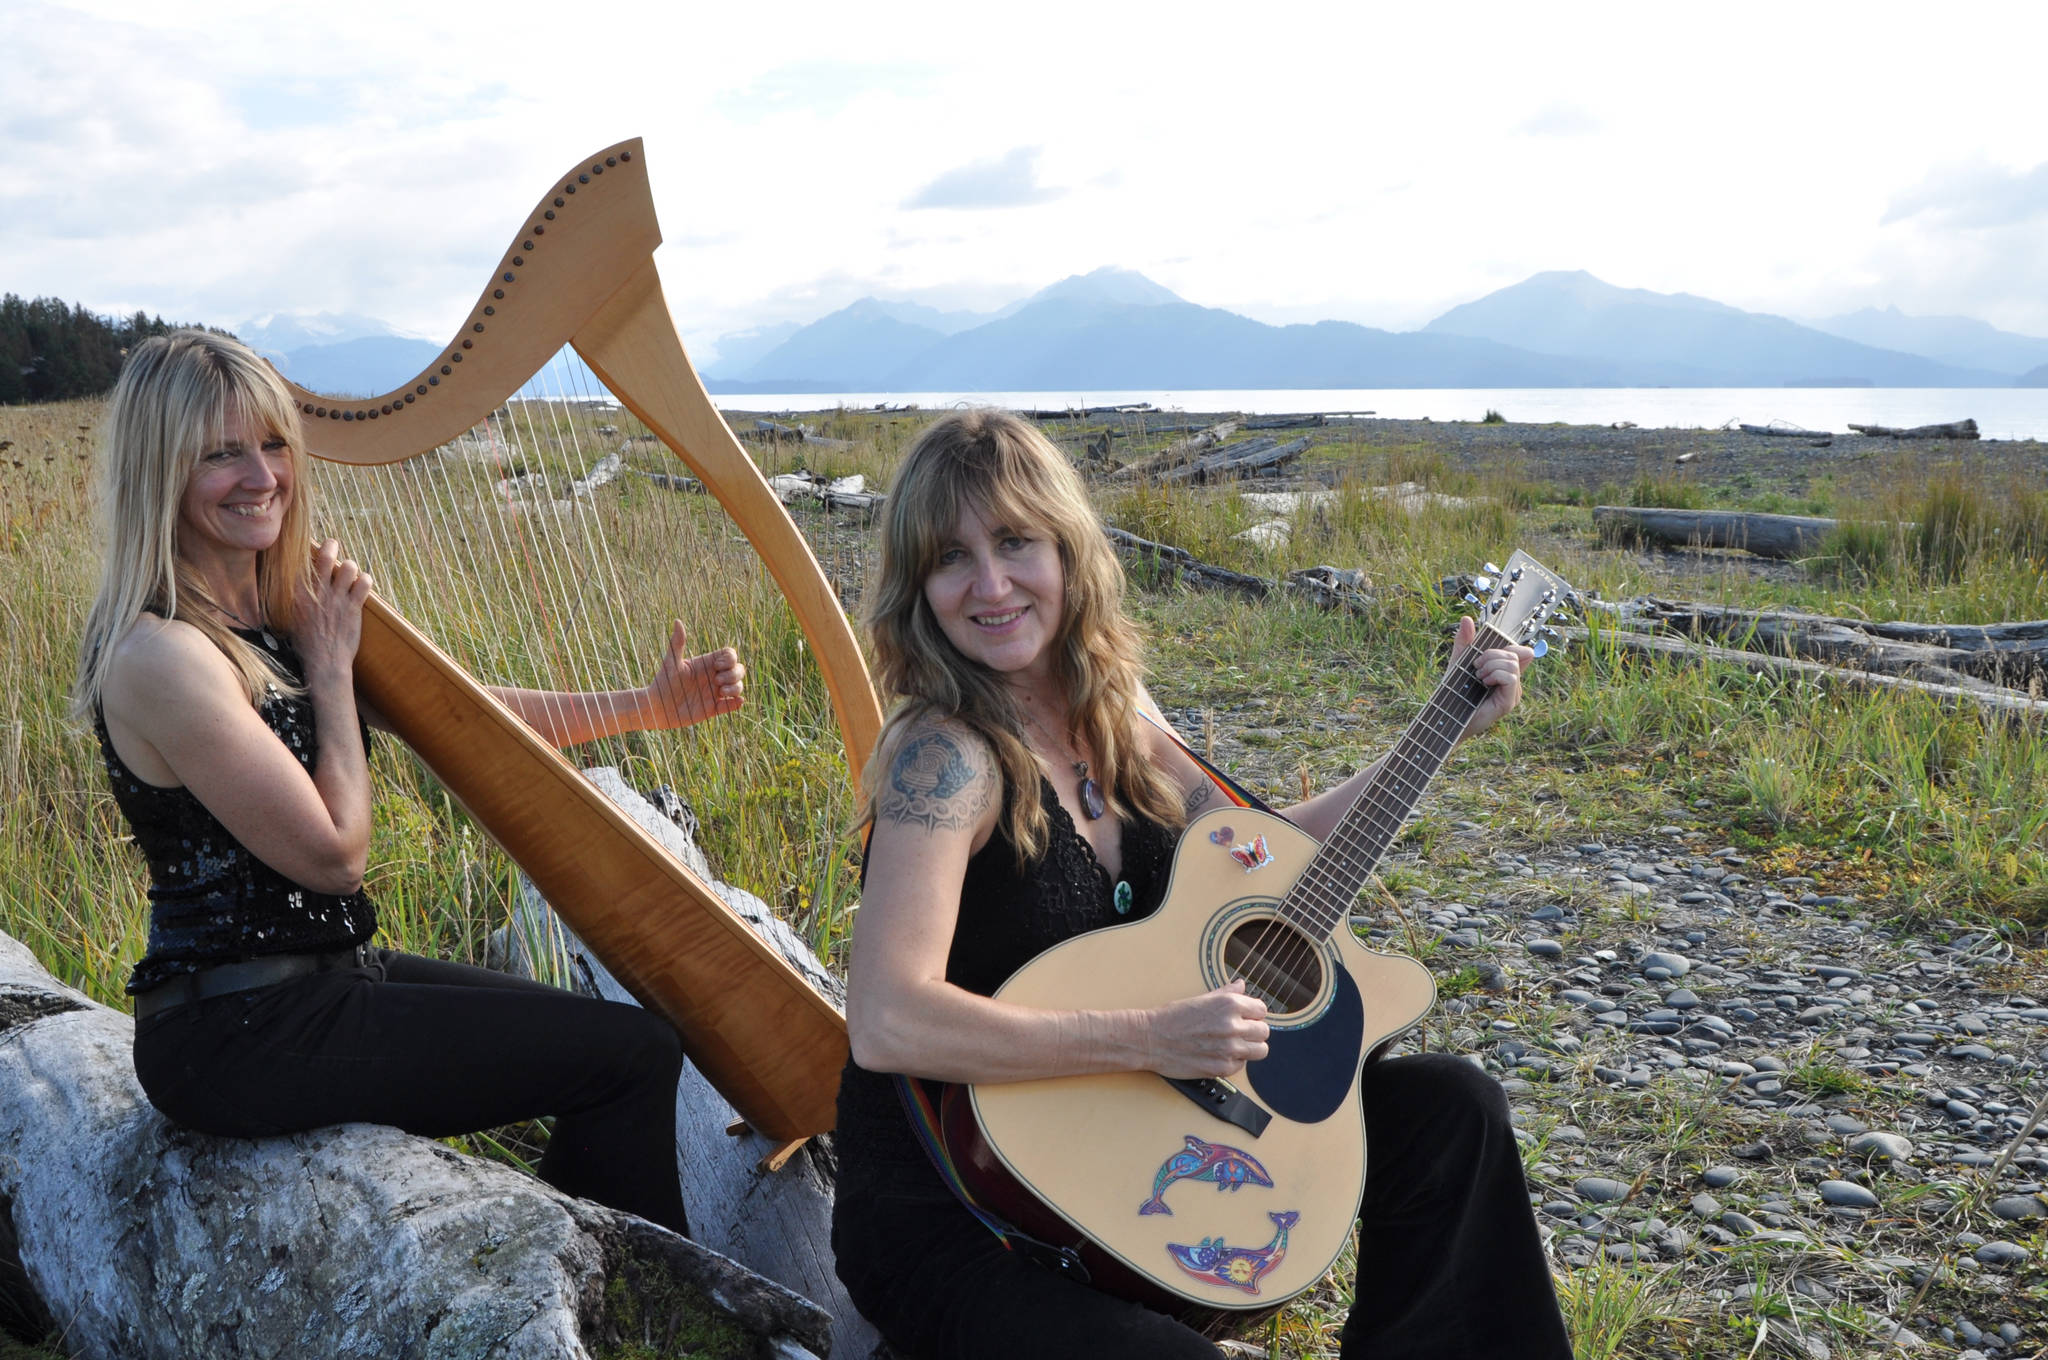 Michelle Morton, left, and Shawn Zuke, left, play harp and guitar at Bishop’s Beach, Homer, Alaska. (Photo by Tim Steinberg)